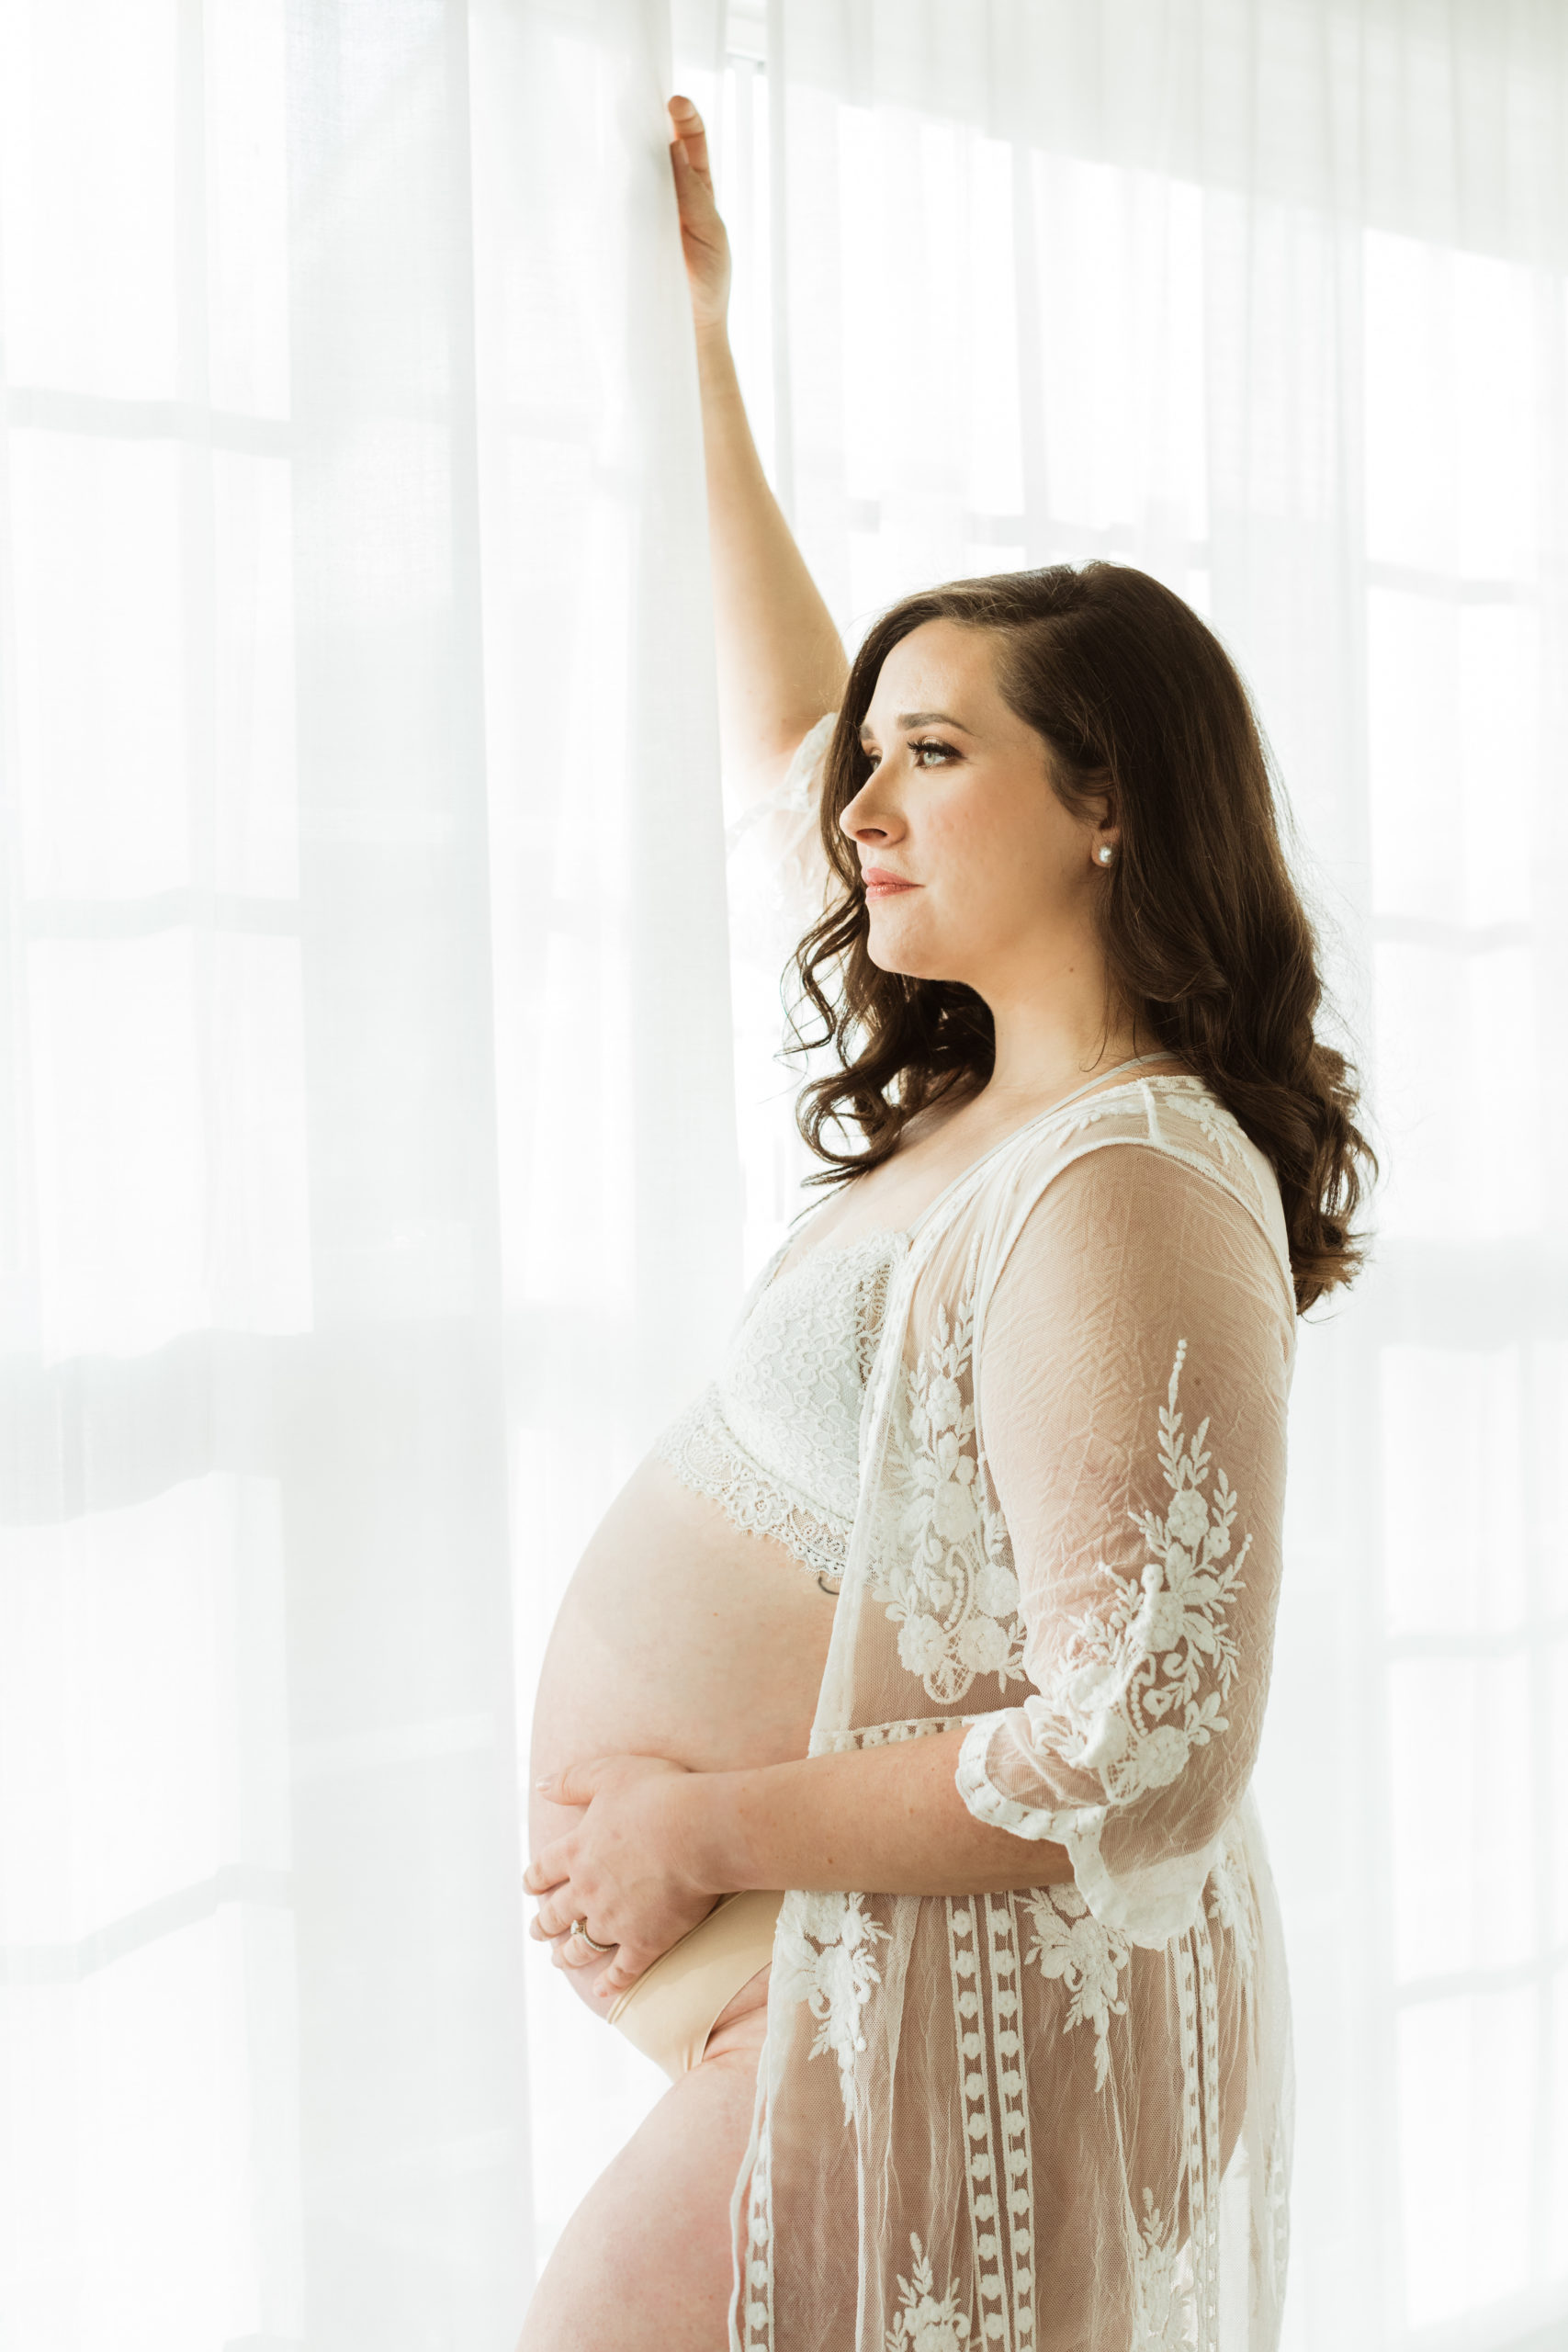 Pregnant mama looking outside a window wearing a see through nightgown with belly exposed. Indoor natural light photography.